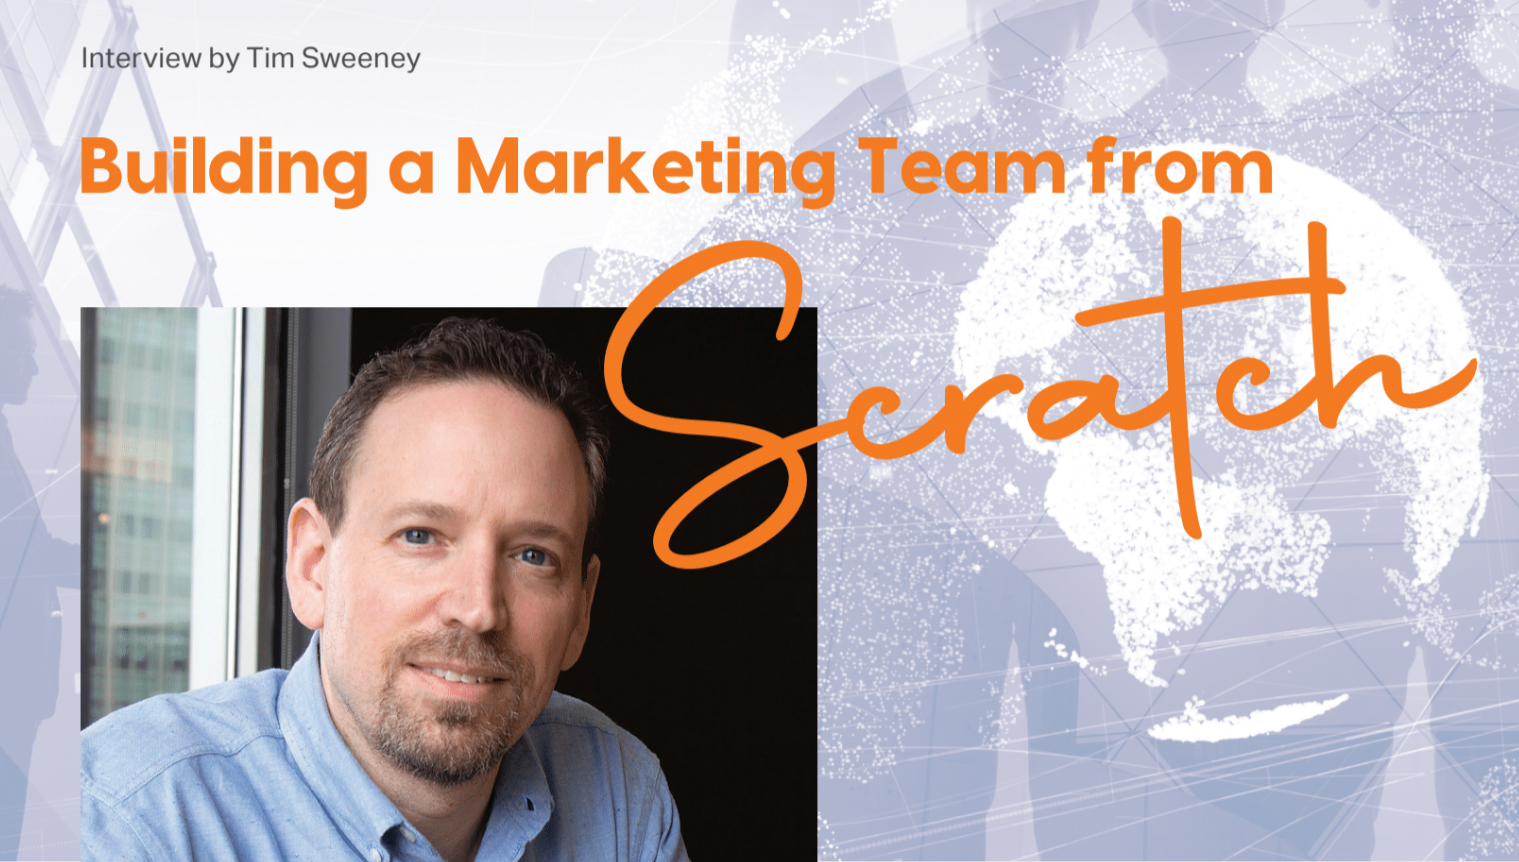 Building a Marketing Team from Scratch